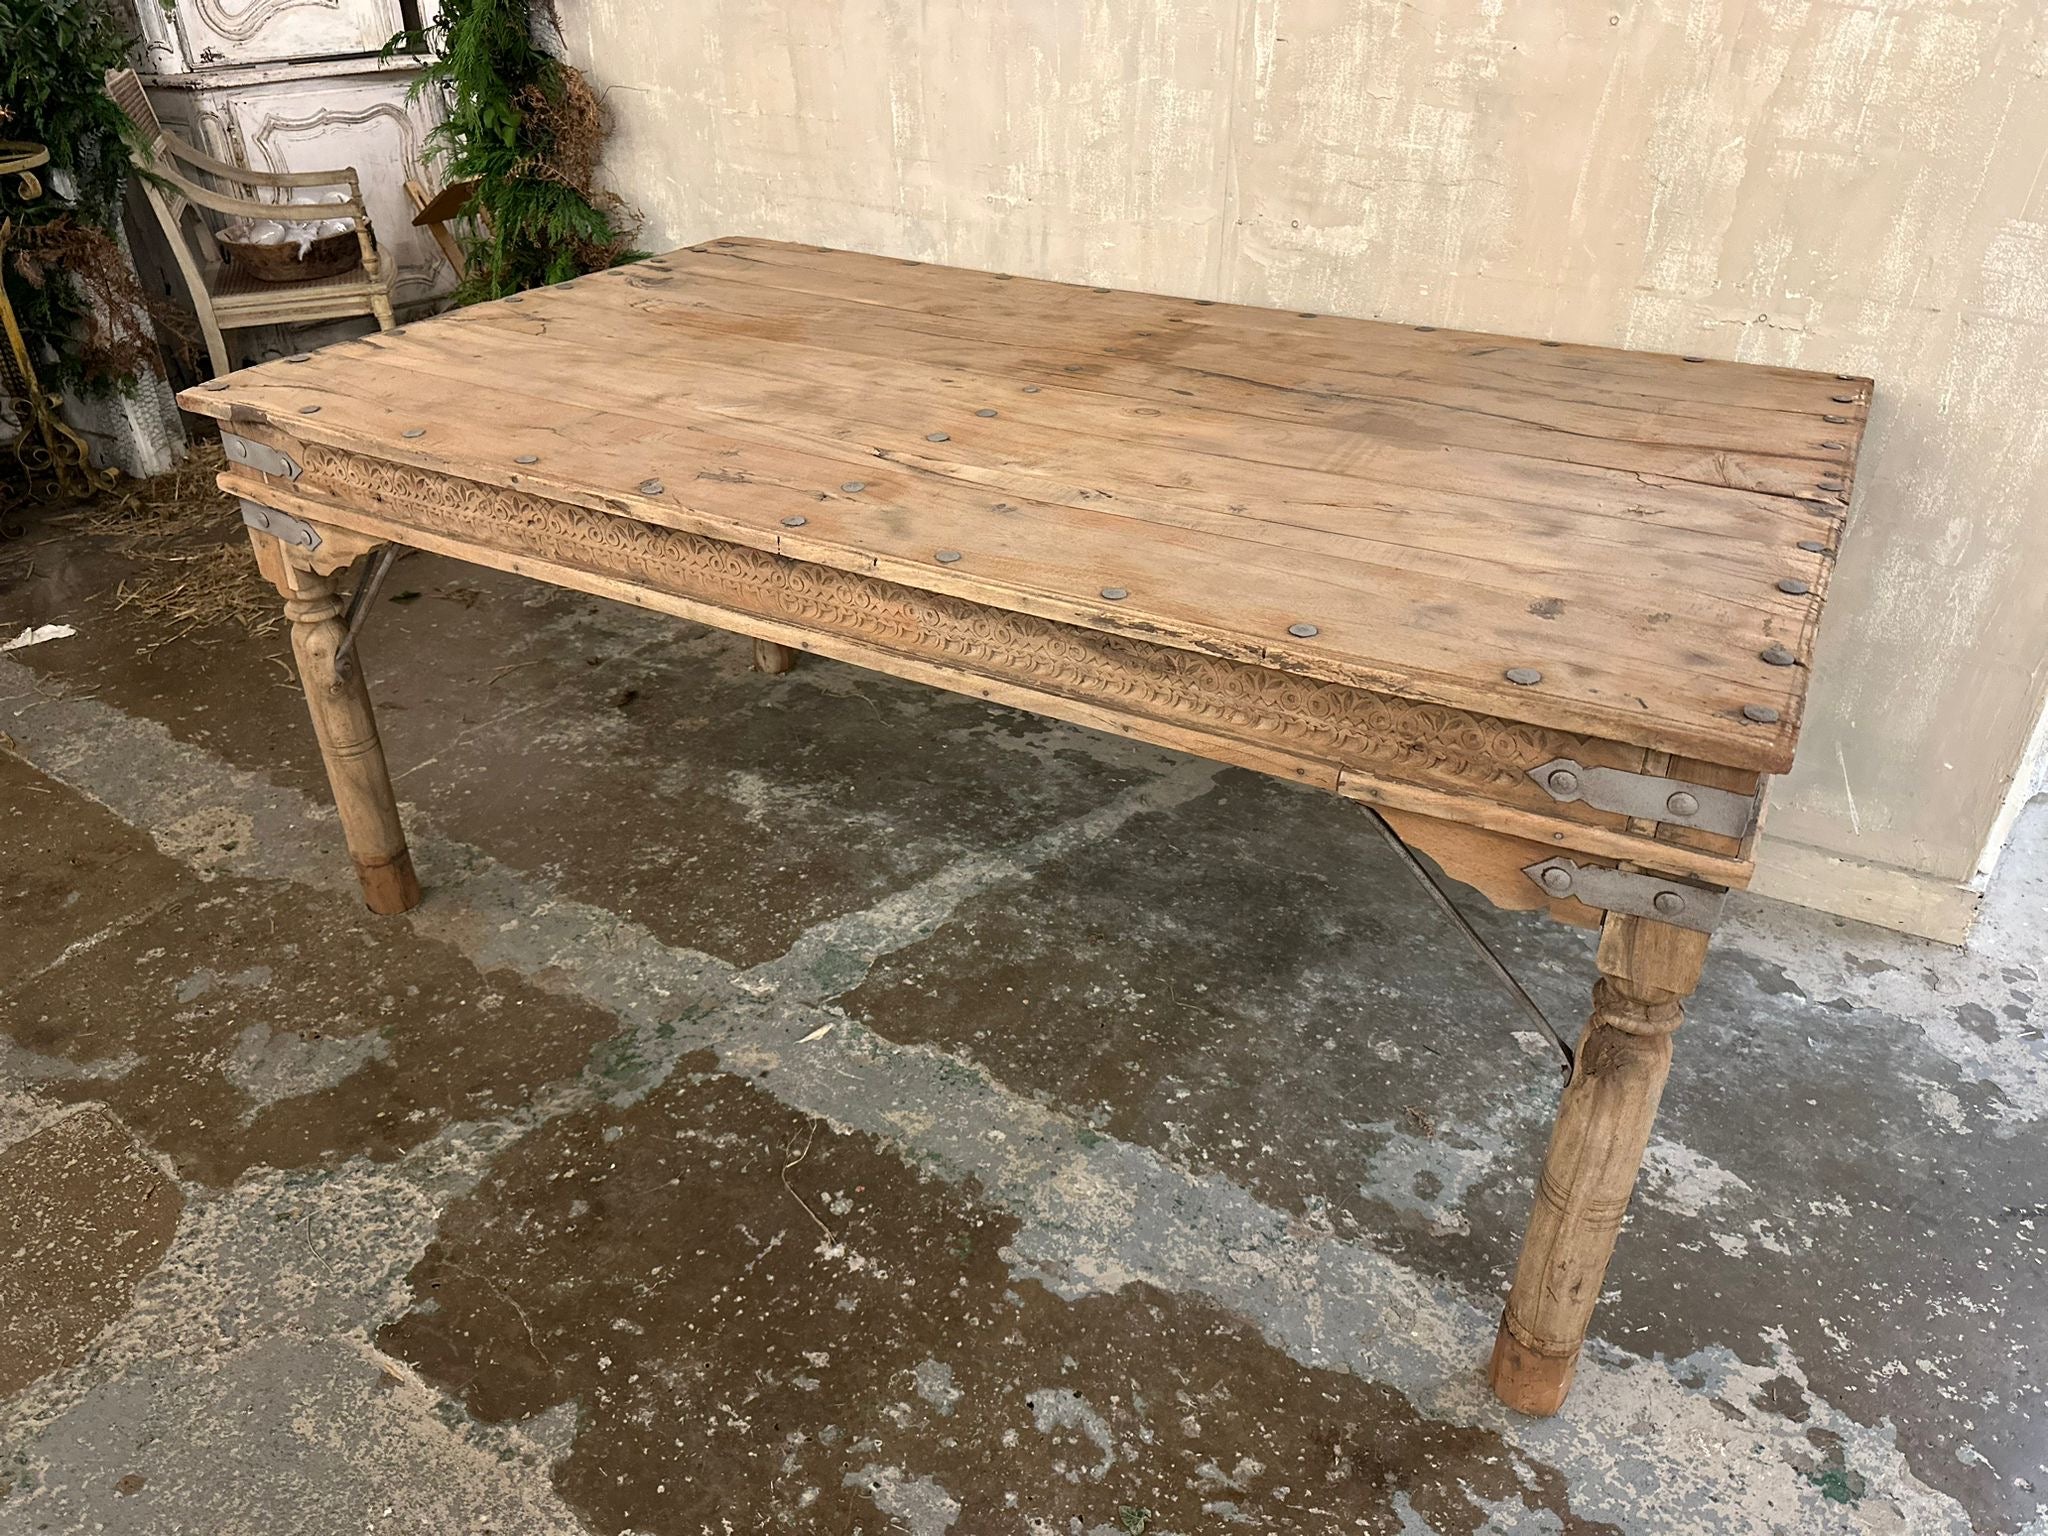 Indian carved dinning table